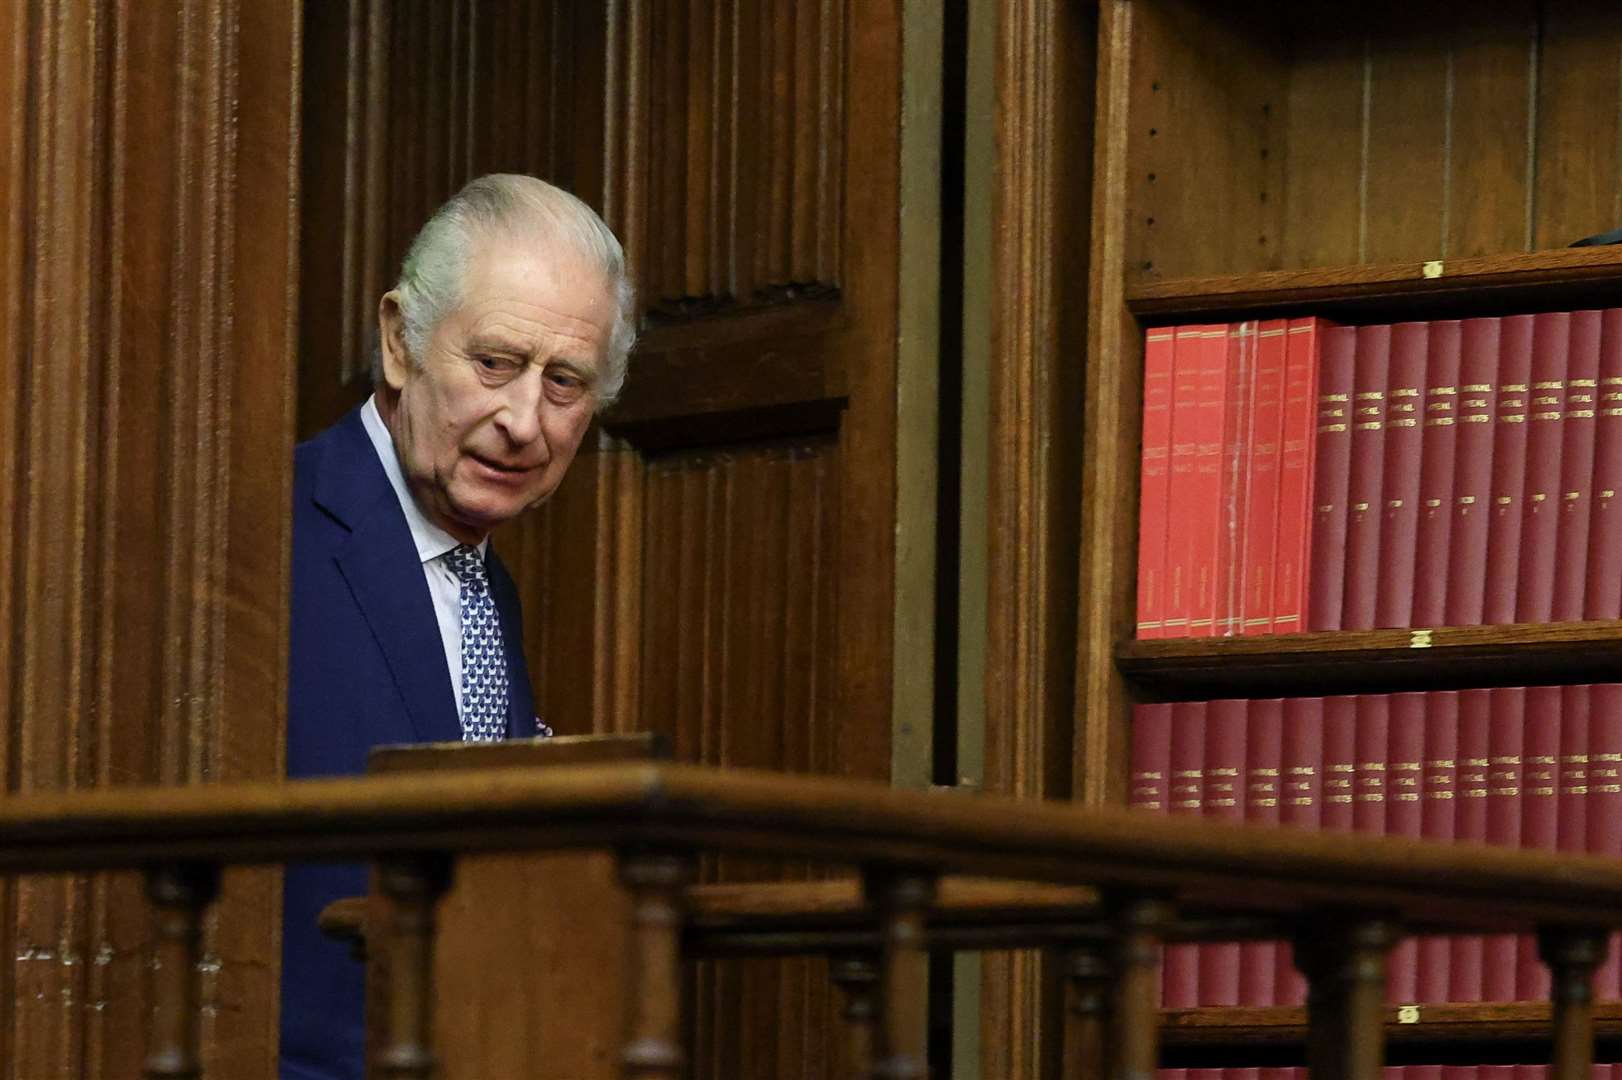 The King is reported to have strengthened his resolve that Andrew will never be allowed to resume royal duties (Hannah McKay/PA)